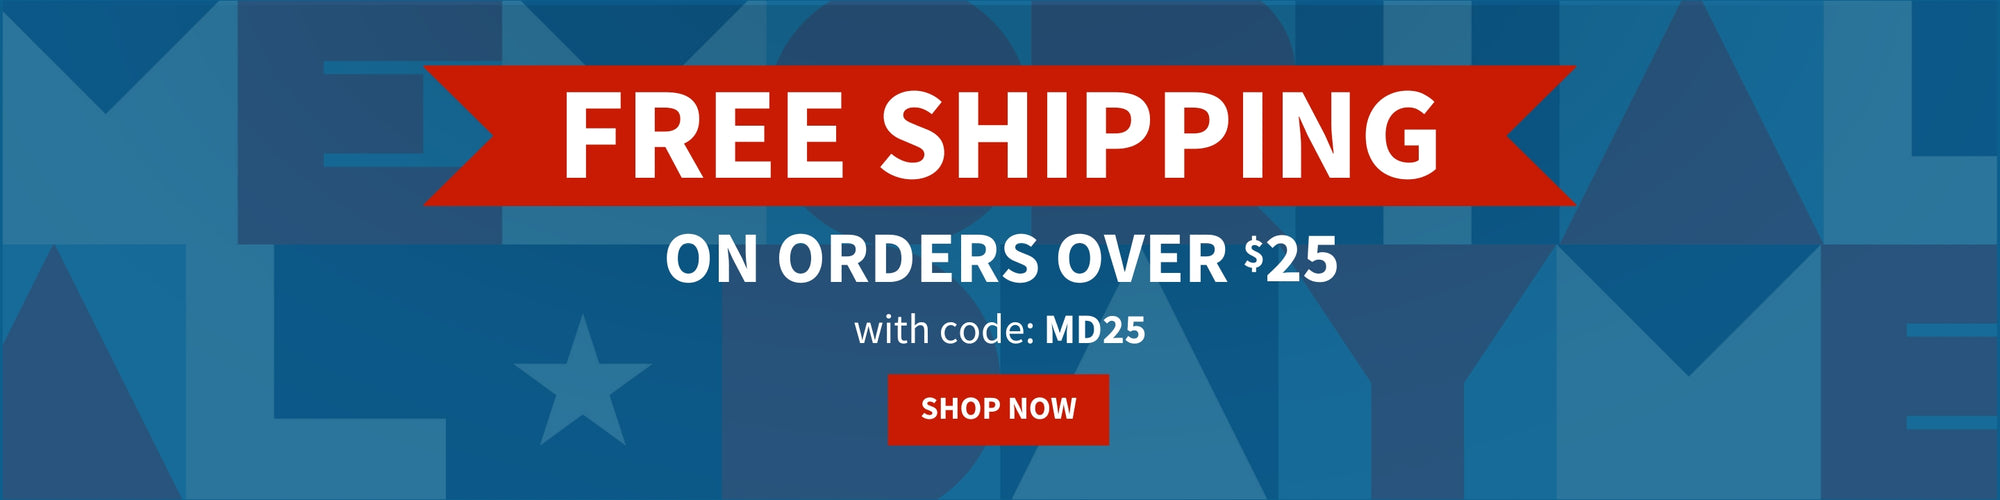 Free Shipping on Orders Over $25 with code: MD25 Shop Now